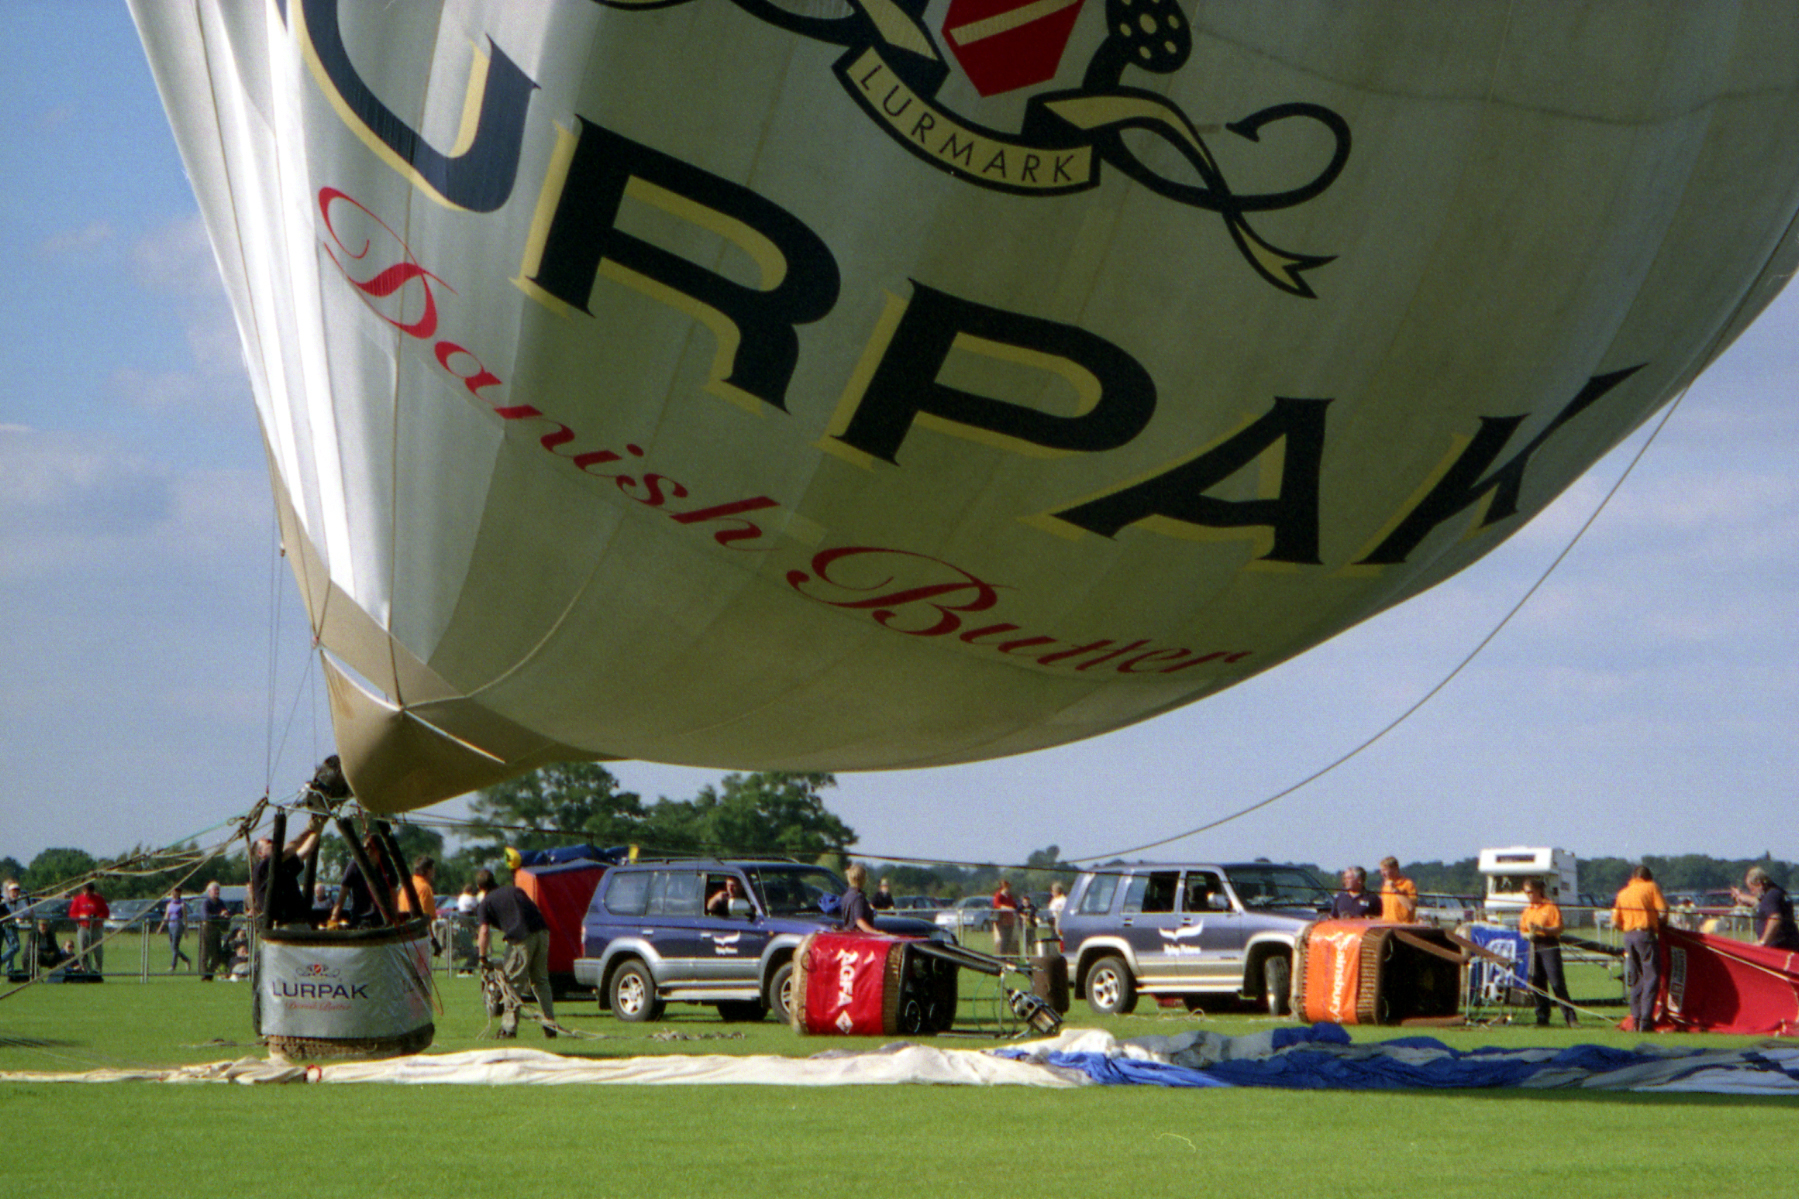 some people and trucks are next to the large inflated balloon